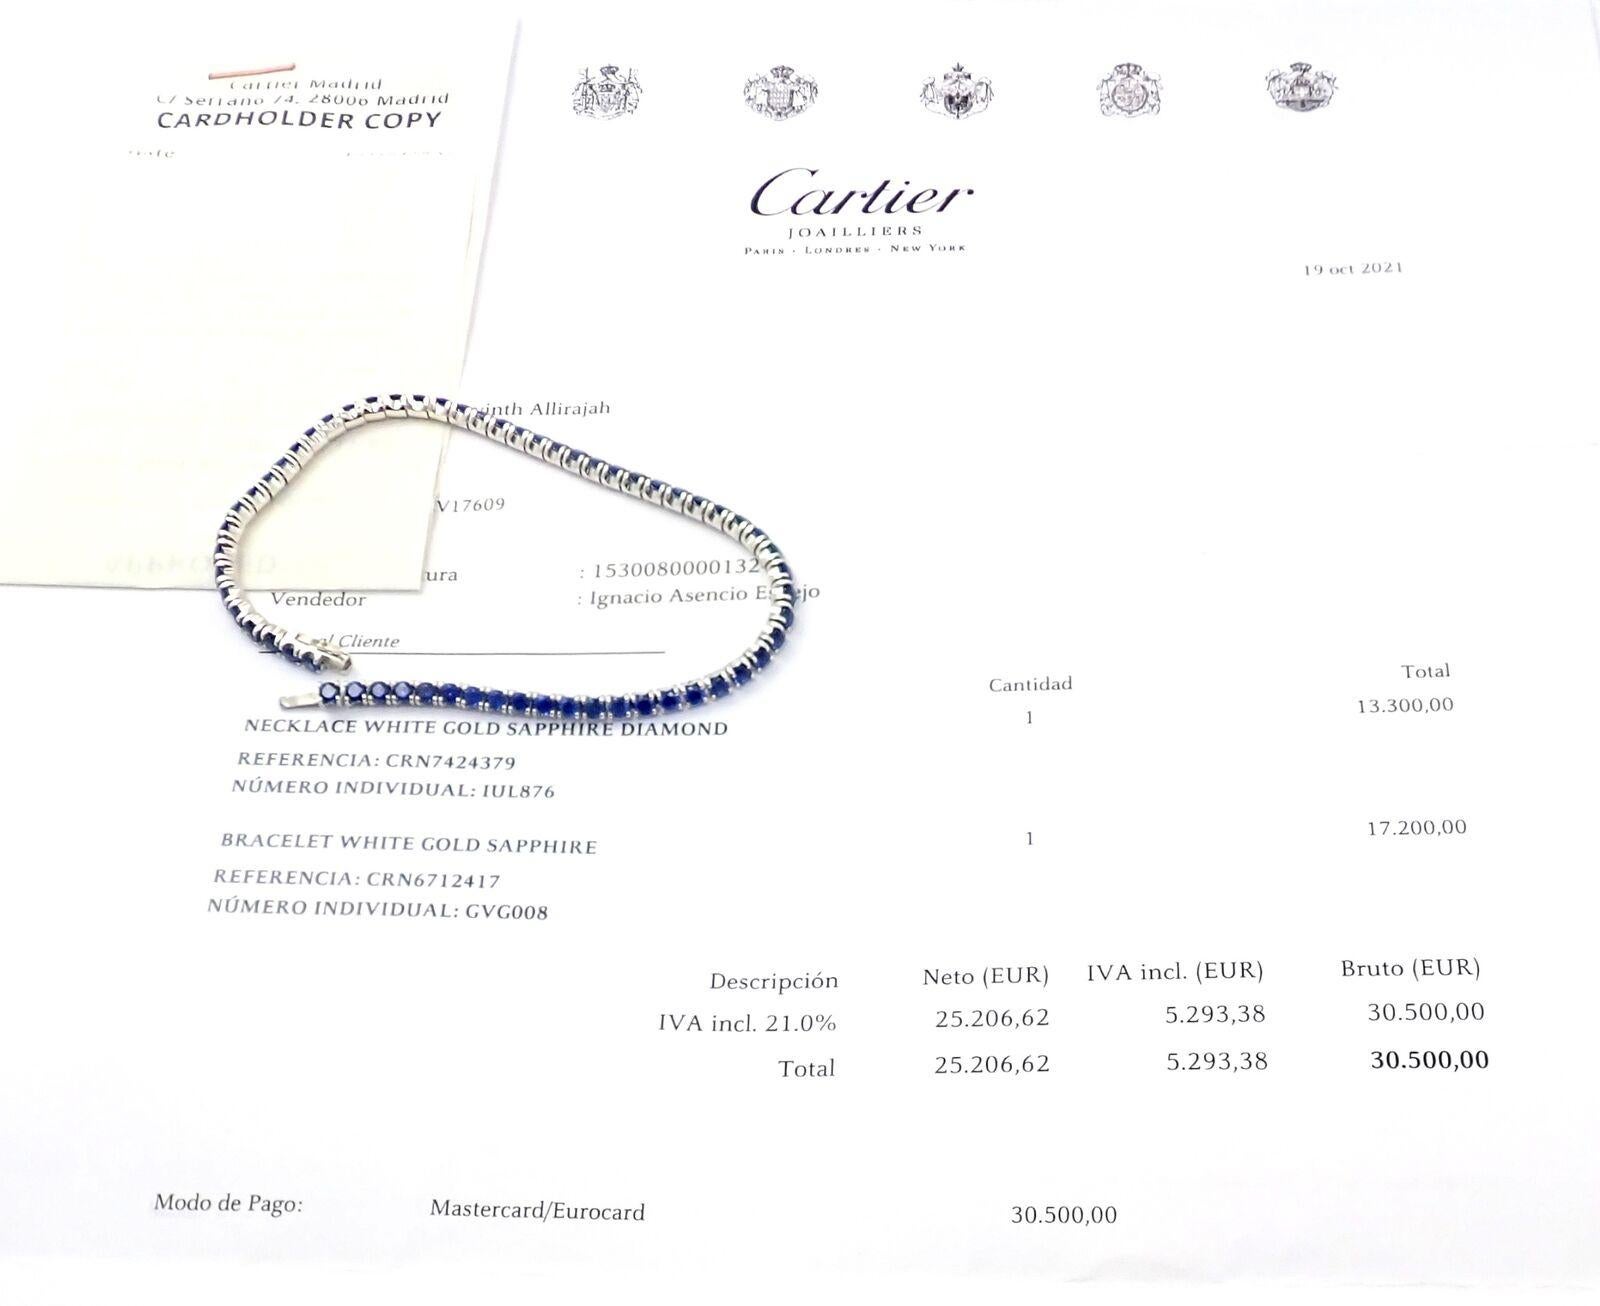 18k White Gold Sapphire Essential Lines Tennis Bracelet by Cartier. 
This bracelet comes with Cartier paper and Cartier box.
With 61 brilliant-cut sapphires
Details: 
Length: 7